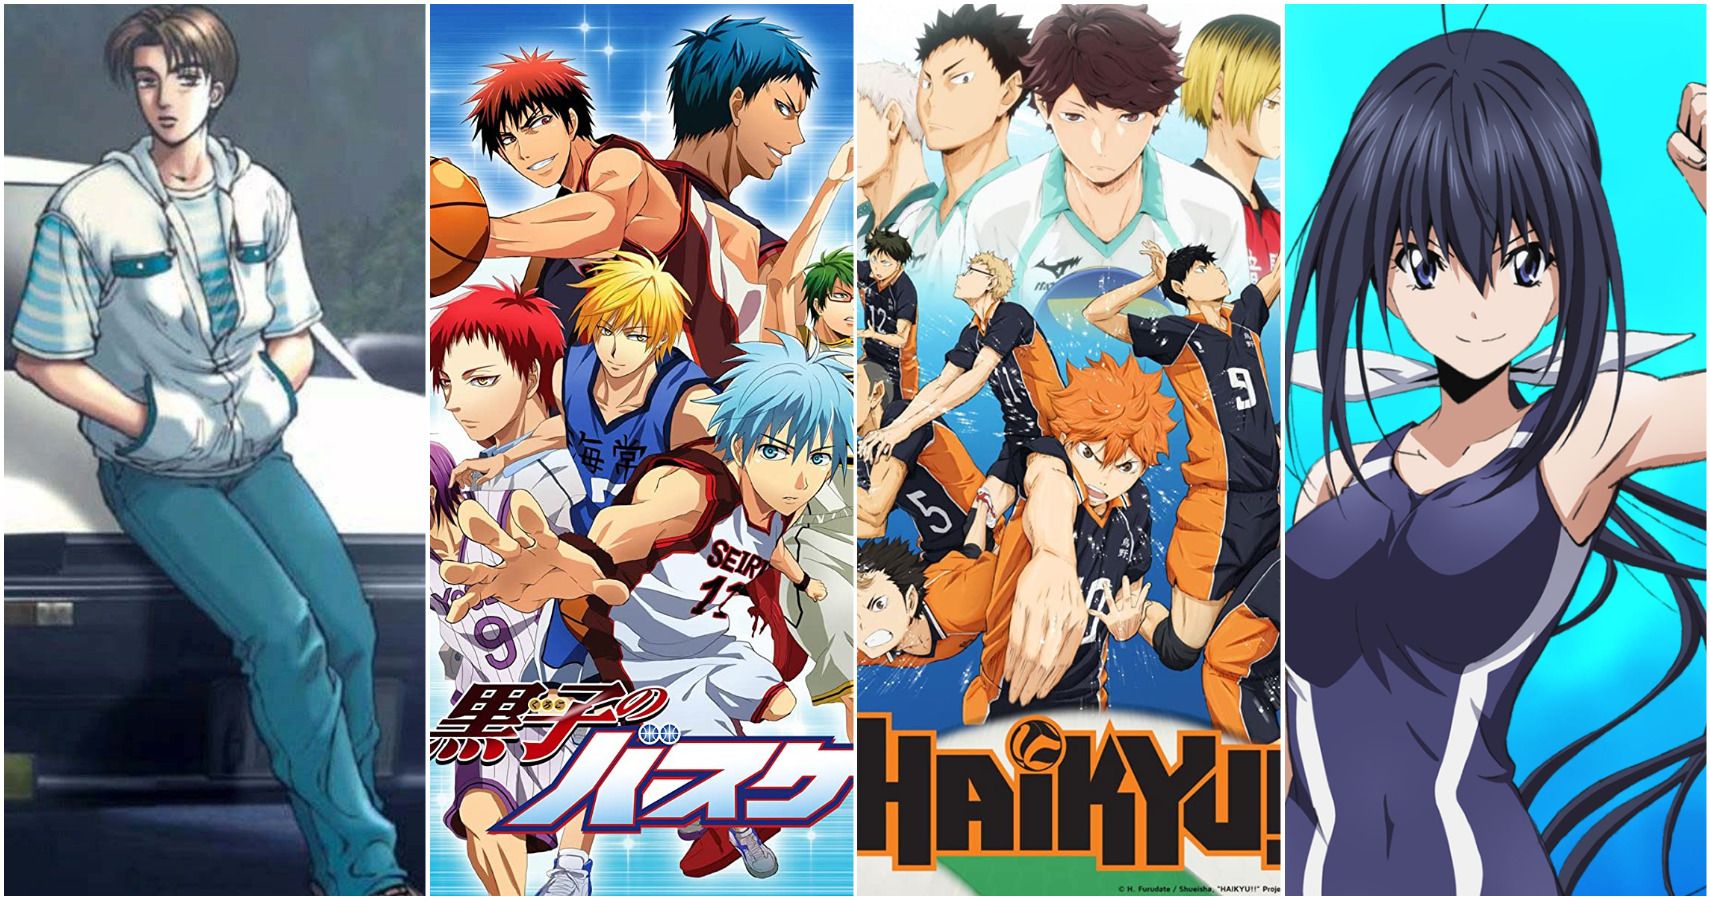 Sports Anime Shows and Movies - Crunchyroll